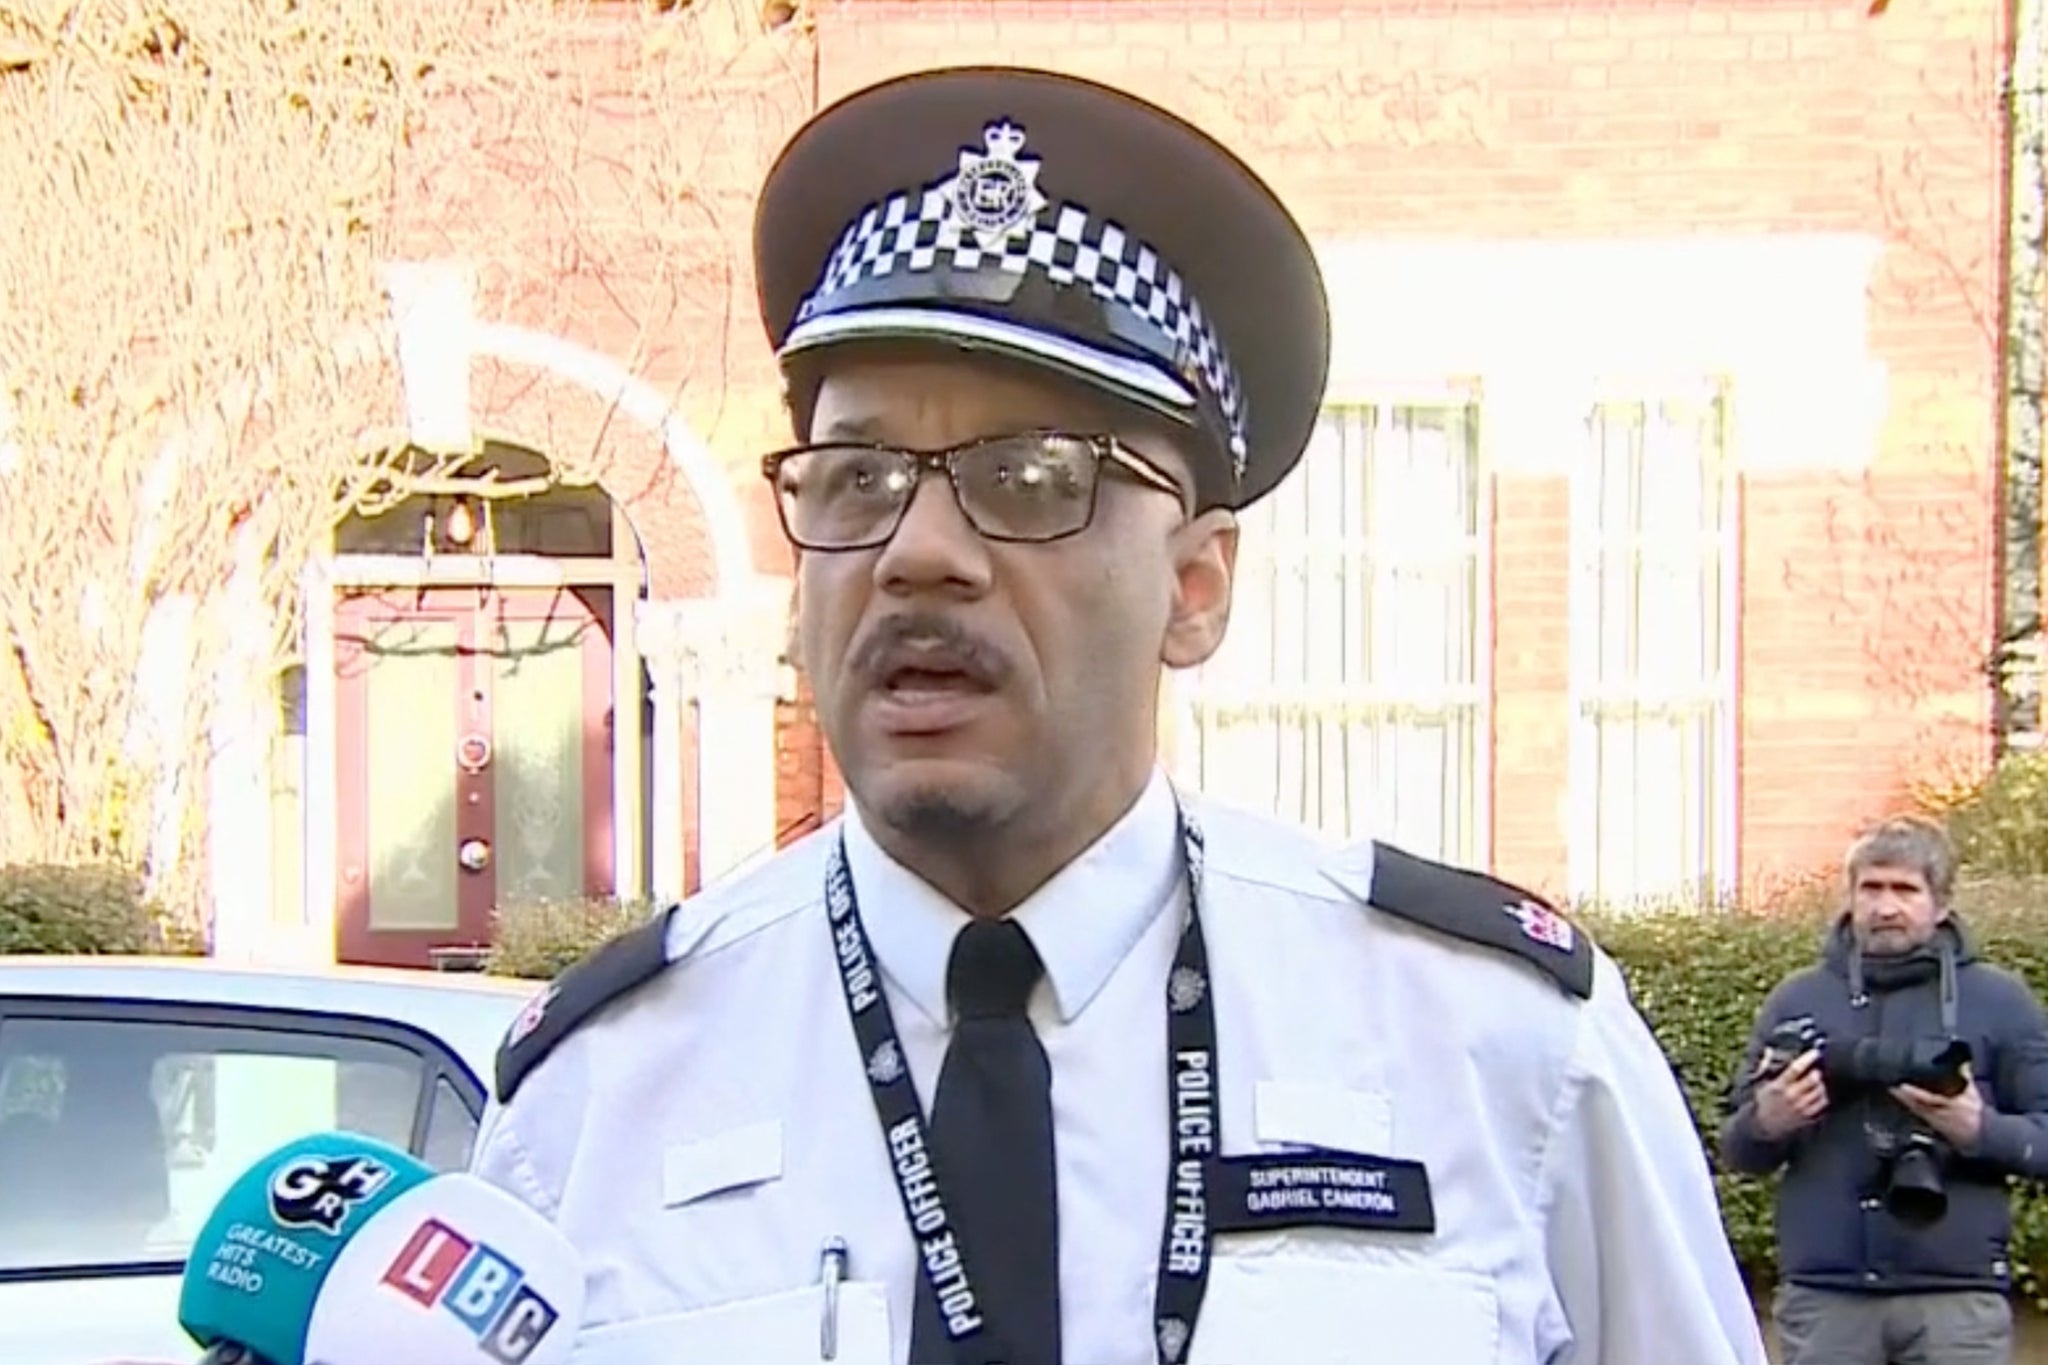 Superintendent Gabriel Cameron vowed police will catch Ezedi following the attack